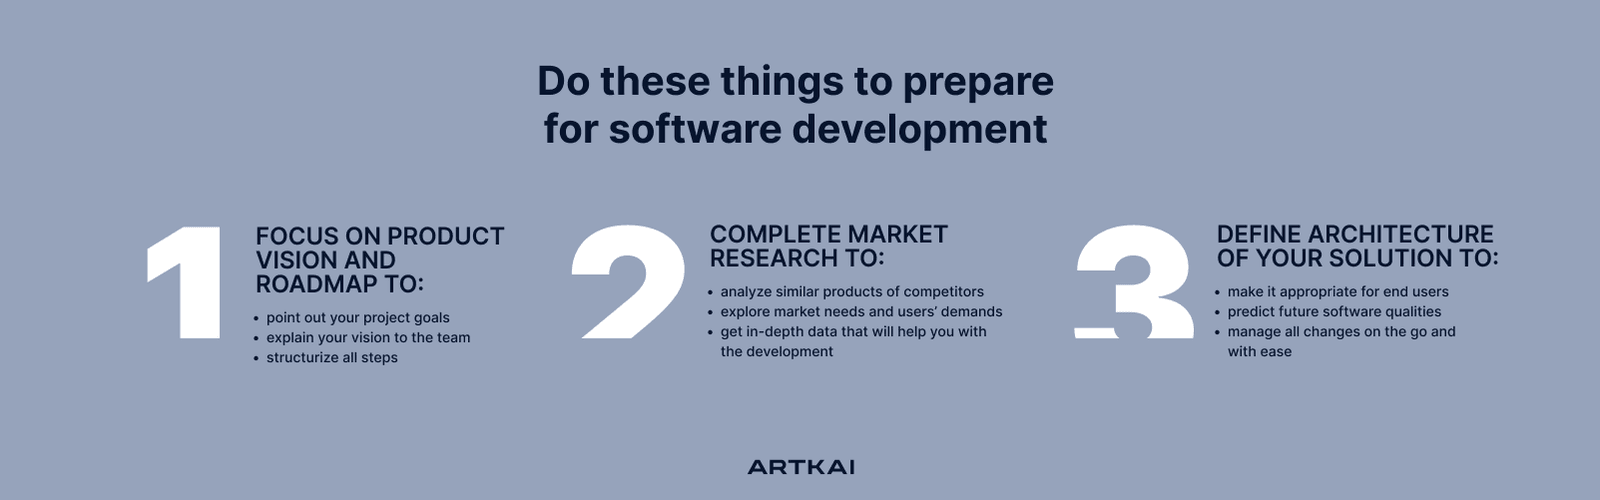 Do-these-things-to-prepare-for-software-development-min